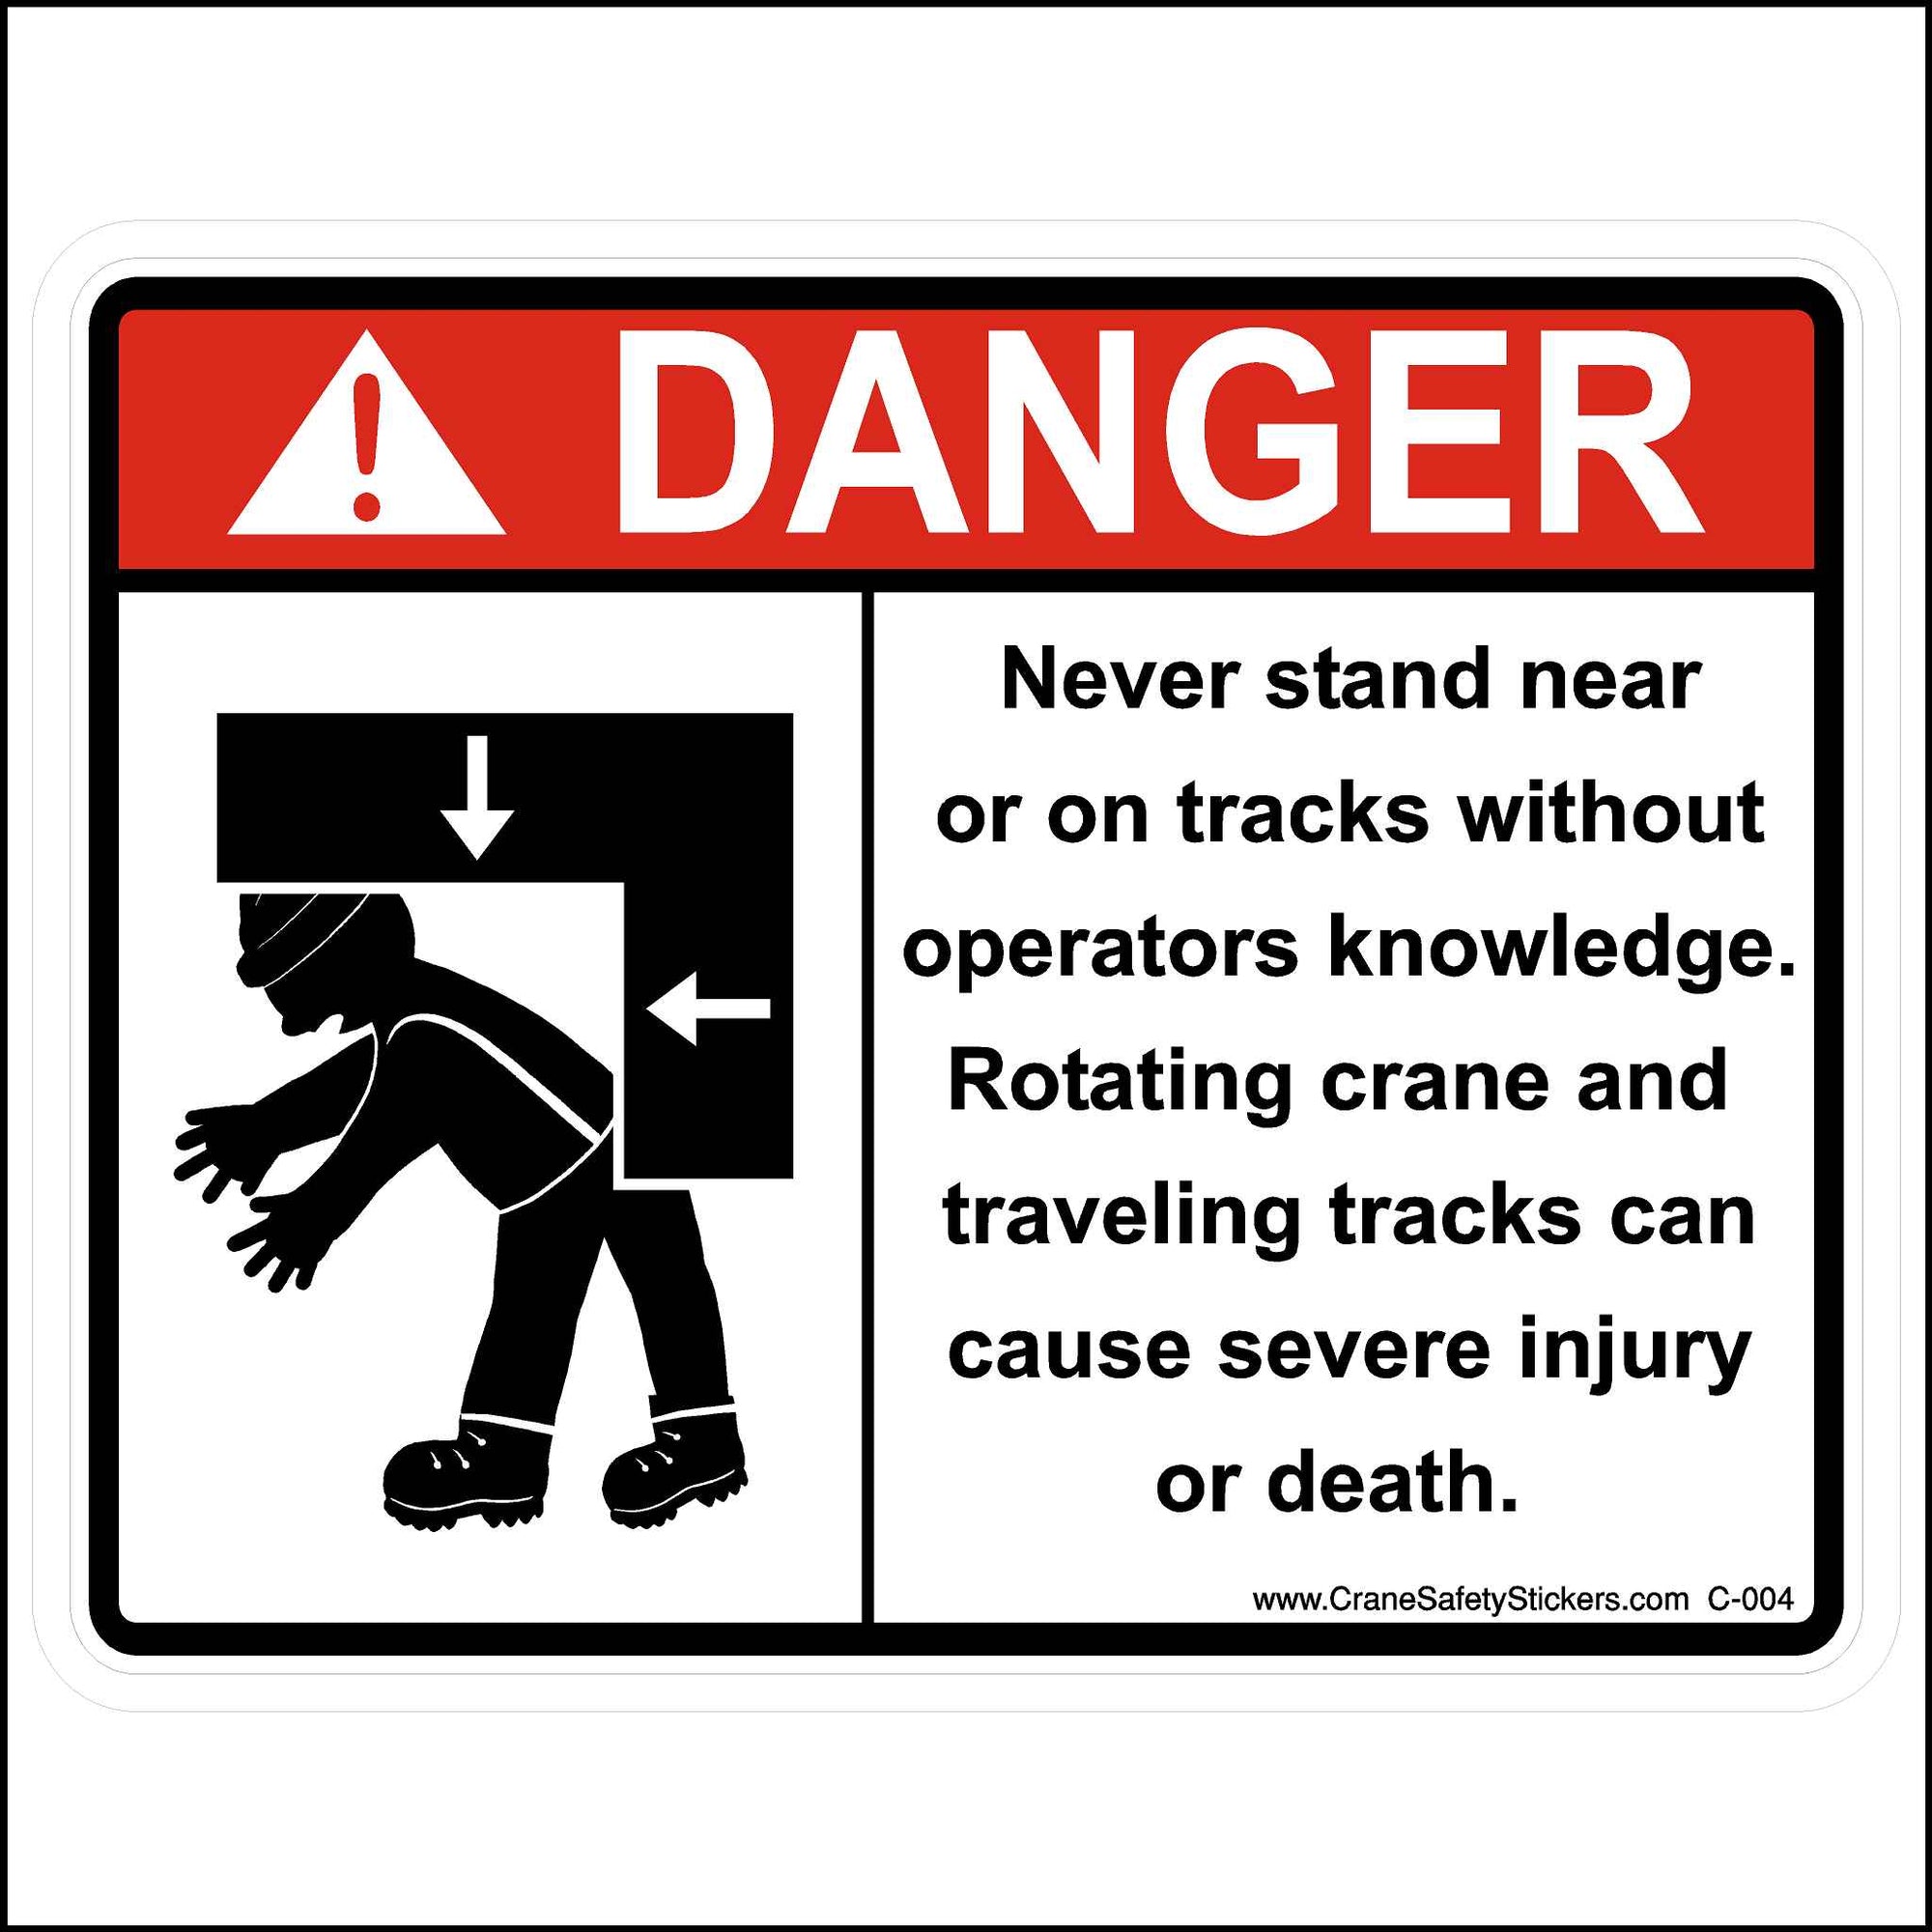 Crane Decal Never stand near or on tracks without operators knowledge. rotating crane and tracks can cause sever injury or death.